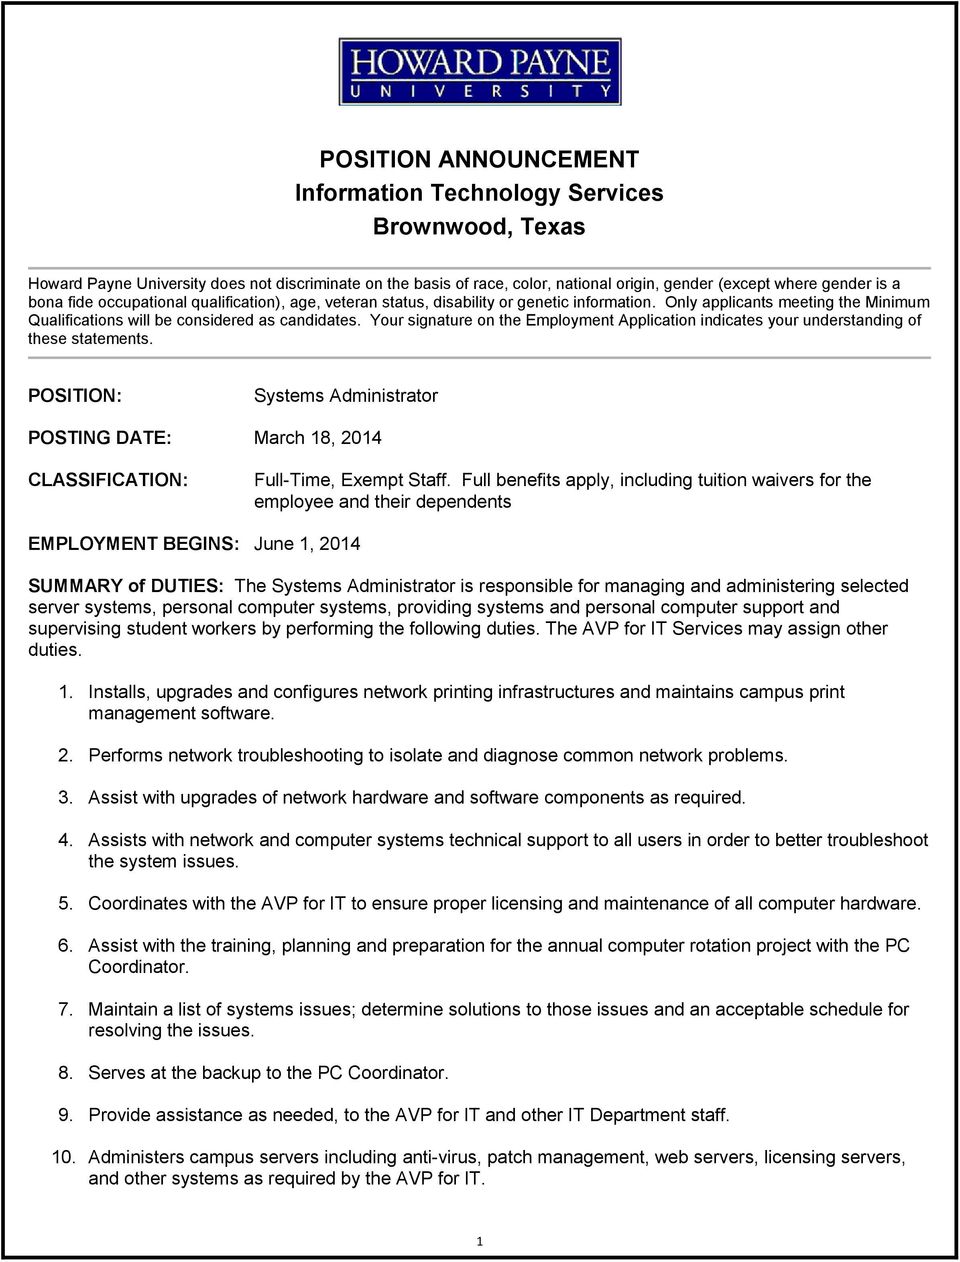 Your signature on the Employment Application indicates your understanding of these statements. POSITION: Systems Administrator POSTING DATE: March 18, 2014 CLASSIFICATION: Full-Time, Exempt Staff.